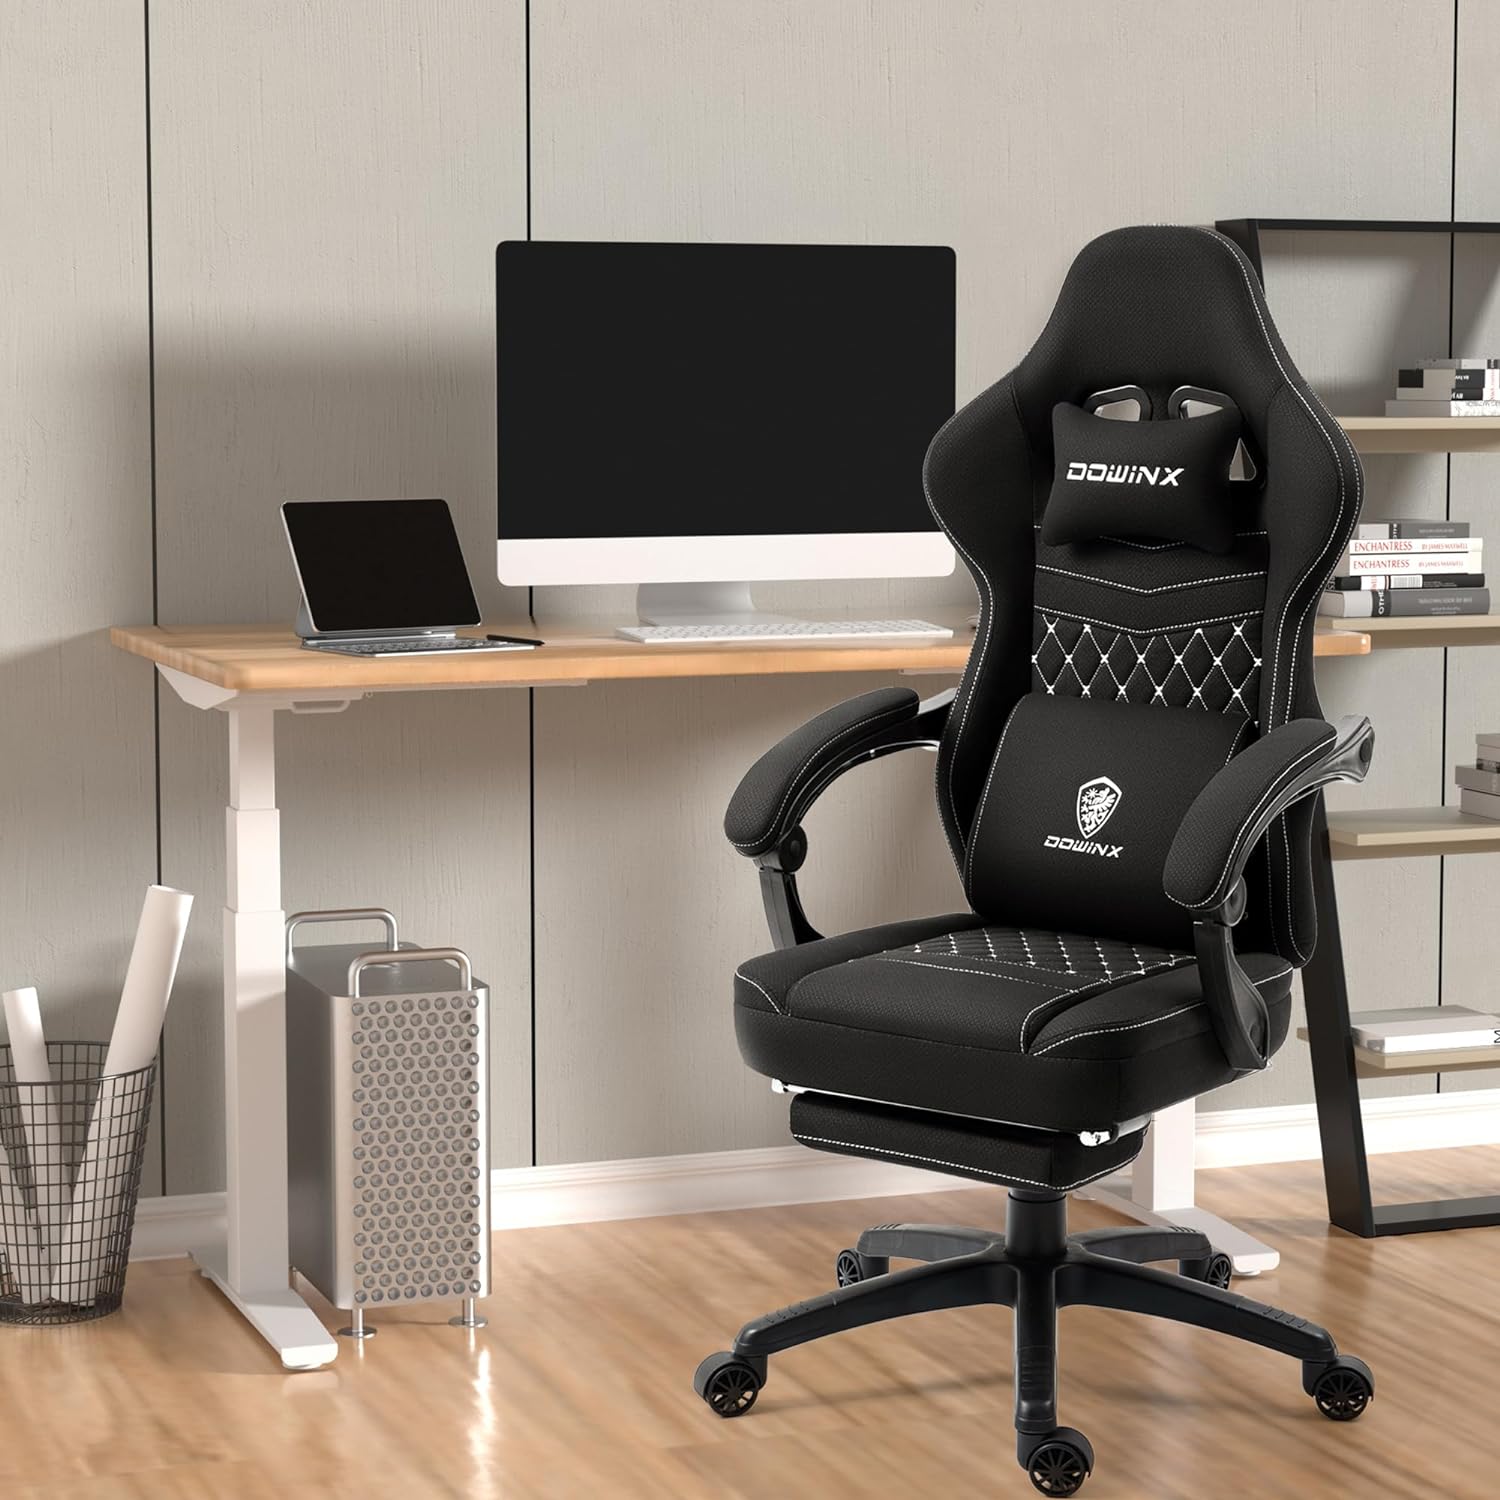 Dowinx Gaming Chair Breathable Fabic Computer Chair with Pocket